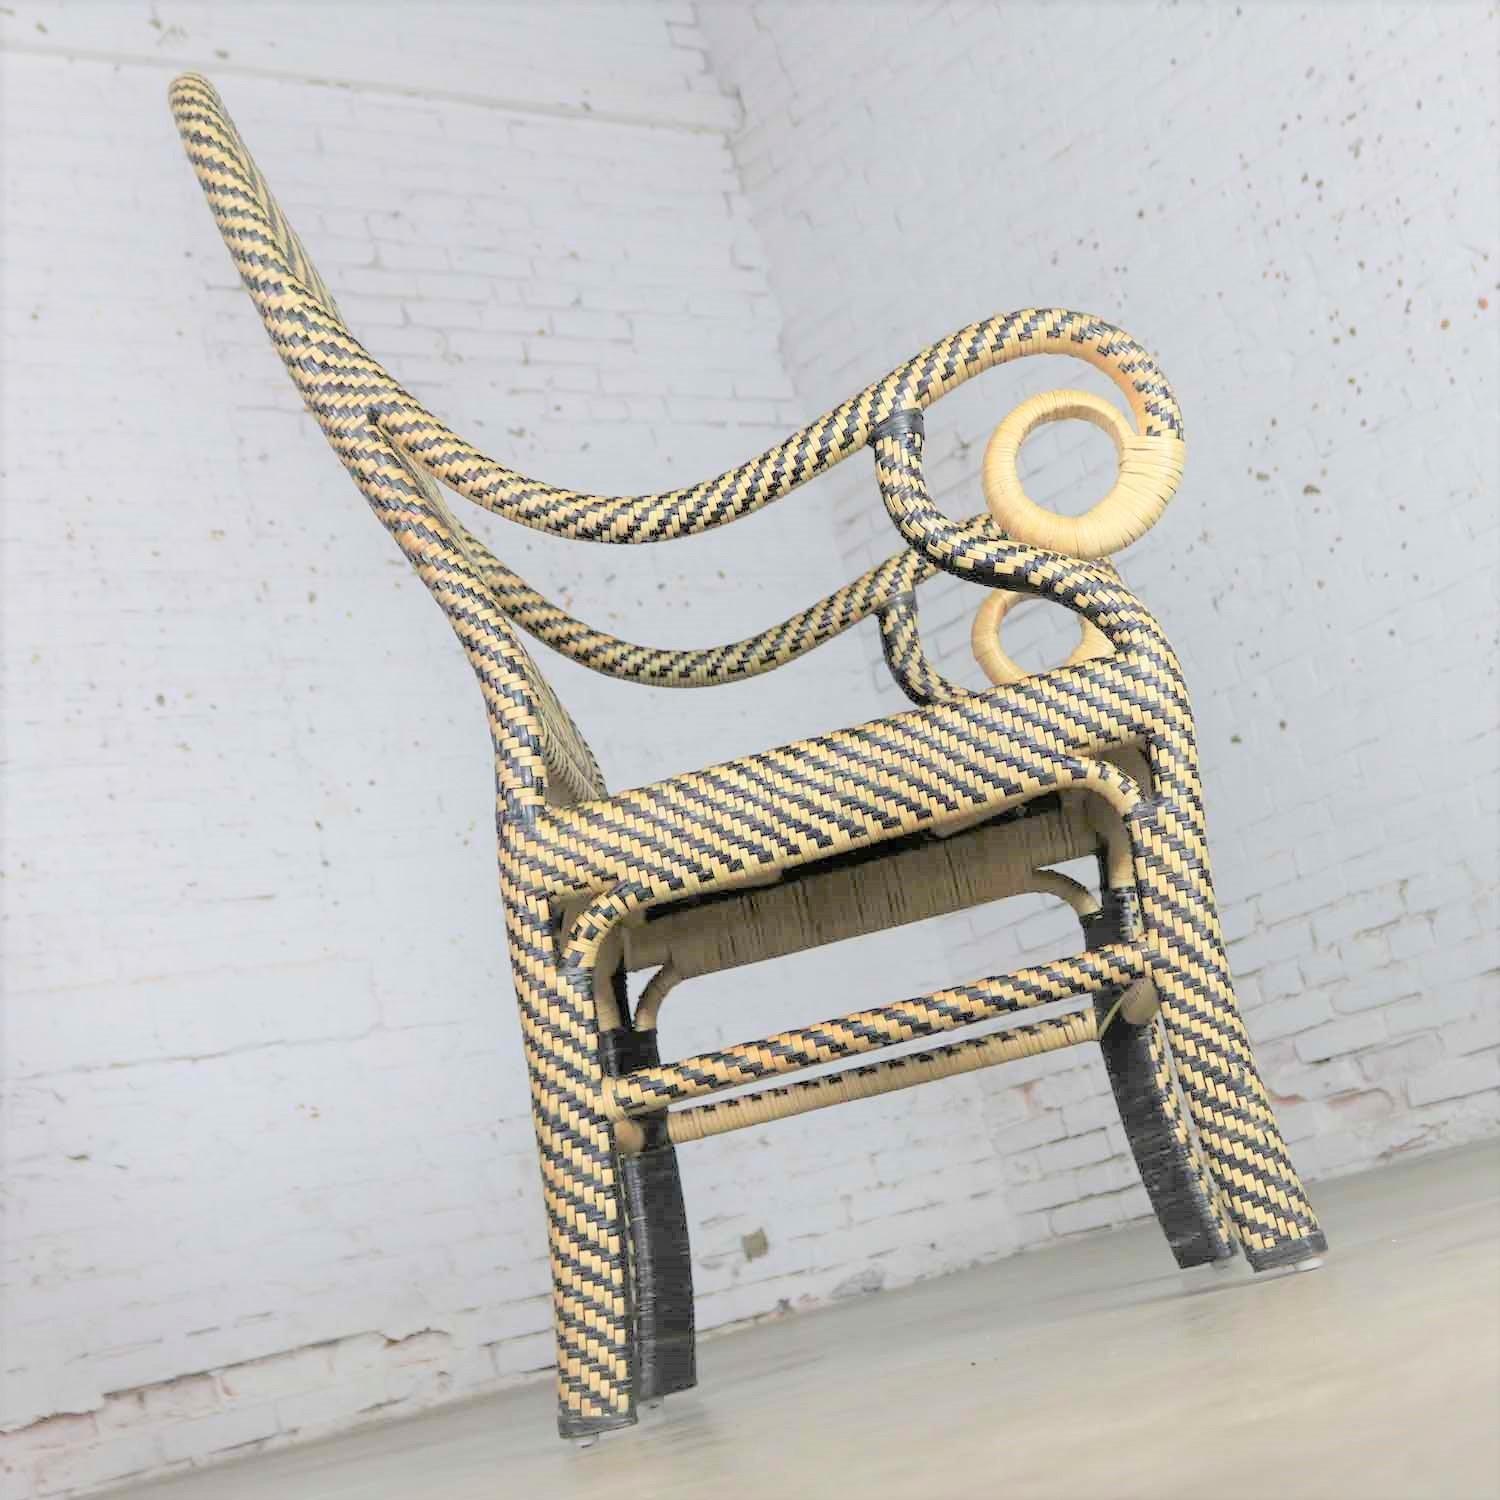 20th Century Two-Tone Chevron Pattern Rattan Wicker Tall Back Chair with Spiral Arms